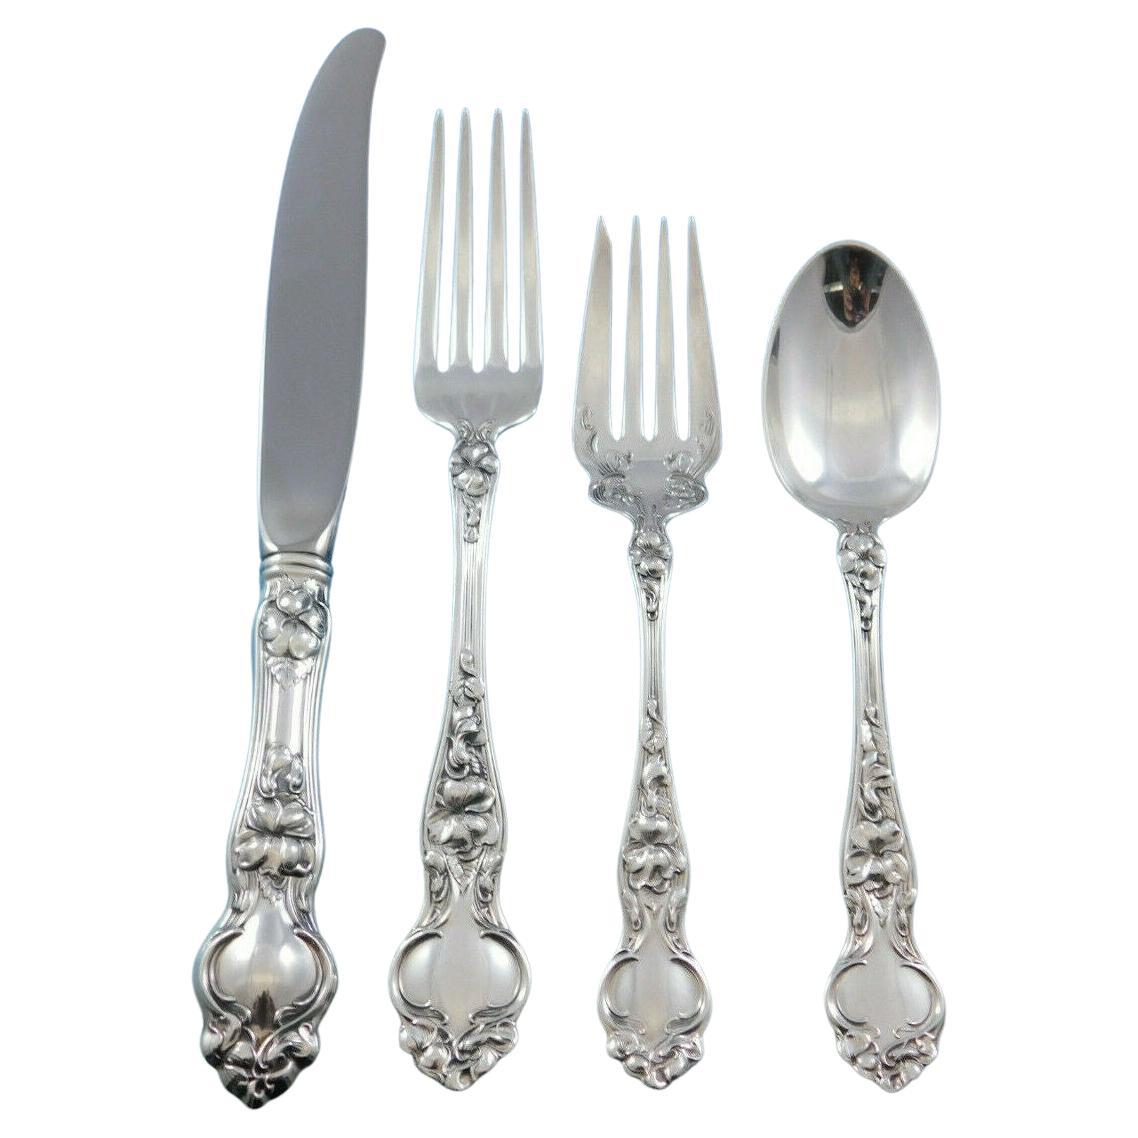 Violet by Wallace Sterling Silver Flatware Service for 12 Set 48 Pcs No Monogram